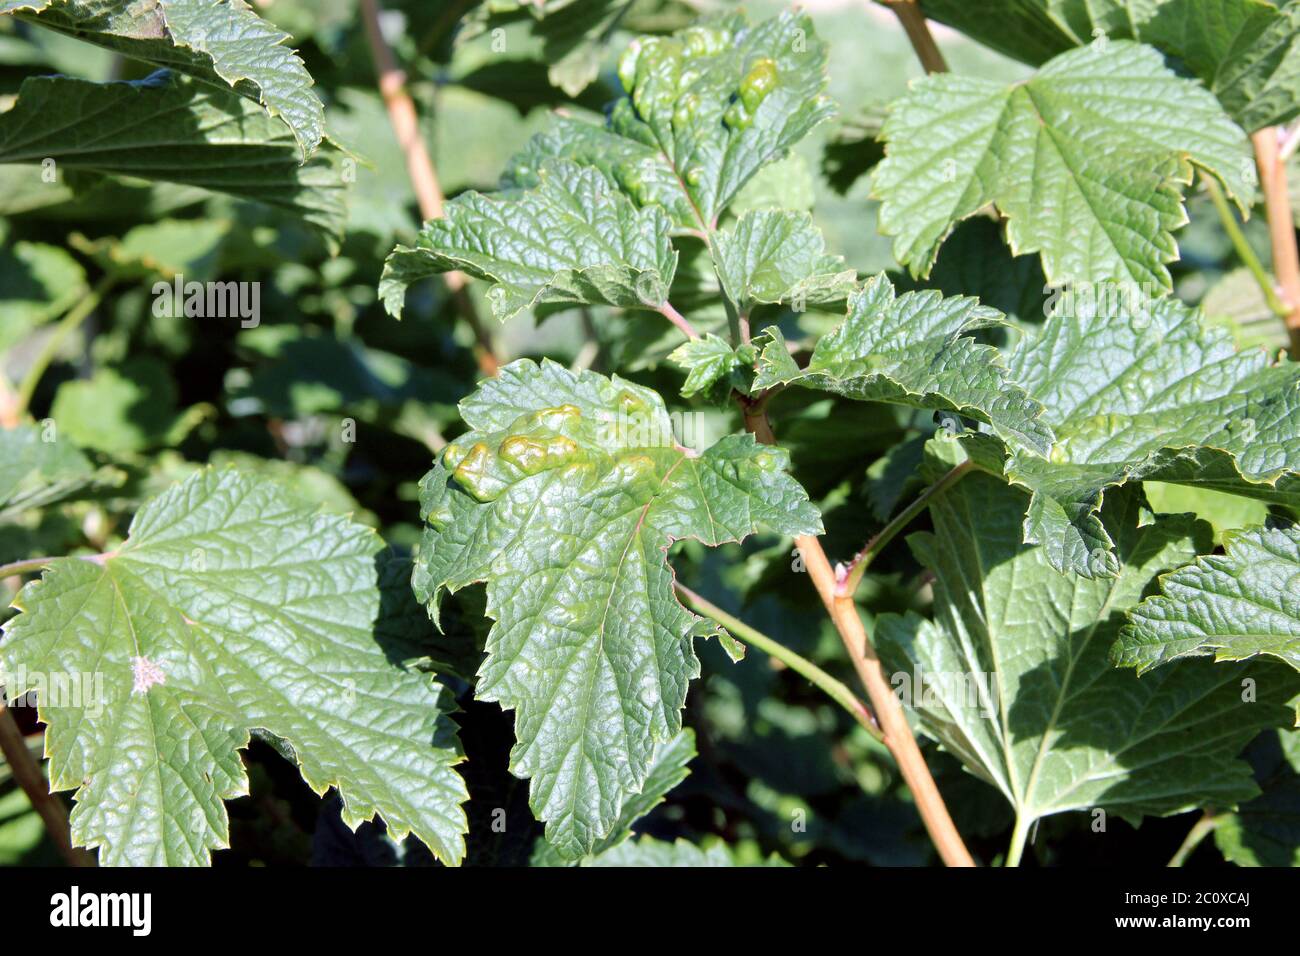 Redcurrant disease. Puccinia ribesii caricis. Anthracnose. Gallic aphids. The infected berry bush with leaves a fungal damaged. Currant blister aphid Stock Photo